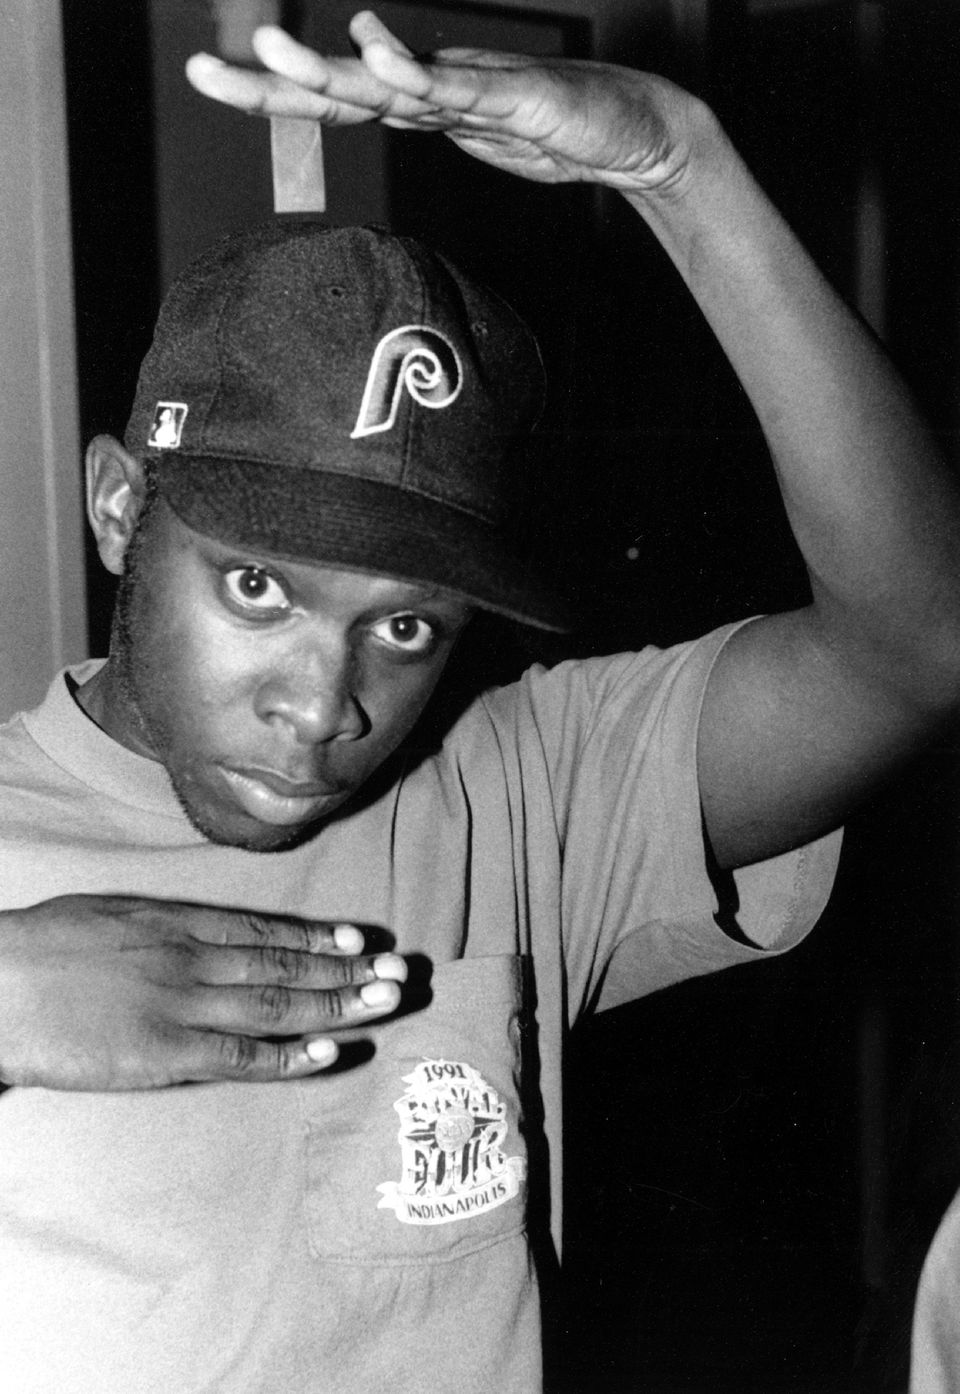 "Can I kick it? To my Tribe that flows in layers/Right now, Phife is a poem sayer."